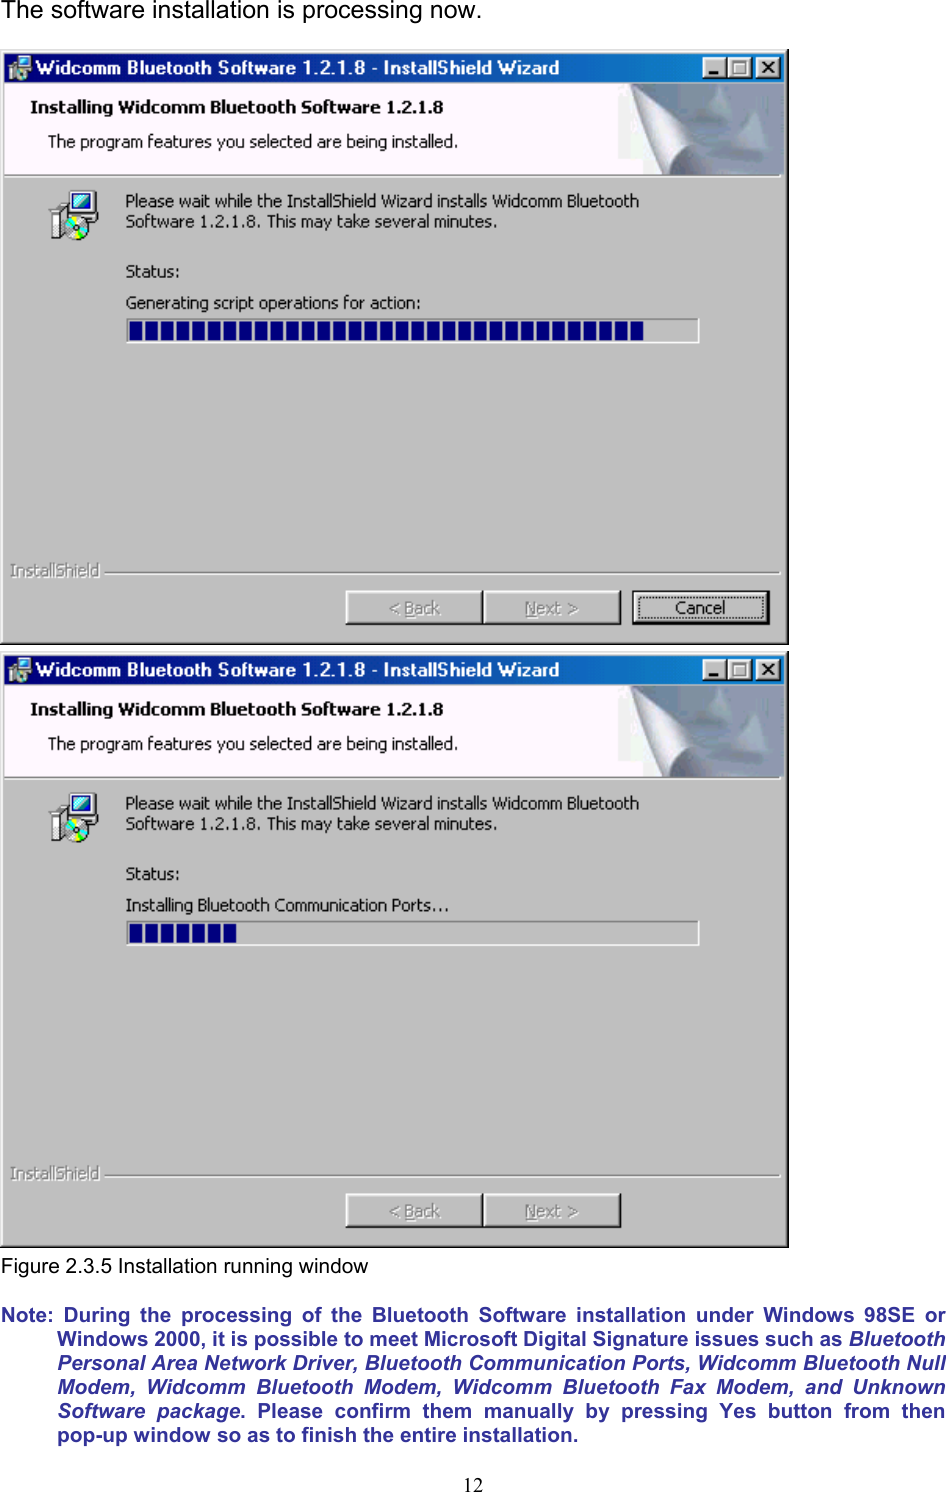  12The software installation is processing now.   Figure 2.3.5 Installation running window Note: During the processing of the Bluetooth Software installation under Windows 98SE or Windows 2000, it is possible to meet Microsoft Digital Signature issues such as Bluetooth Personal Area Network Driver, Bluetooth Communication Ports, Widcomm Bluetooth Null Modem, Widcomm Bluetooth Modem, Widcomm Bluetooth Fax Modem, and Unknown Software package. Please confirm them manually by pressing Yes button from then pop-up window so as to finish the entire installation. 